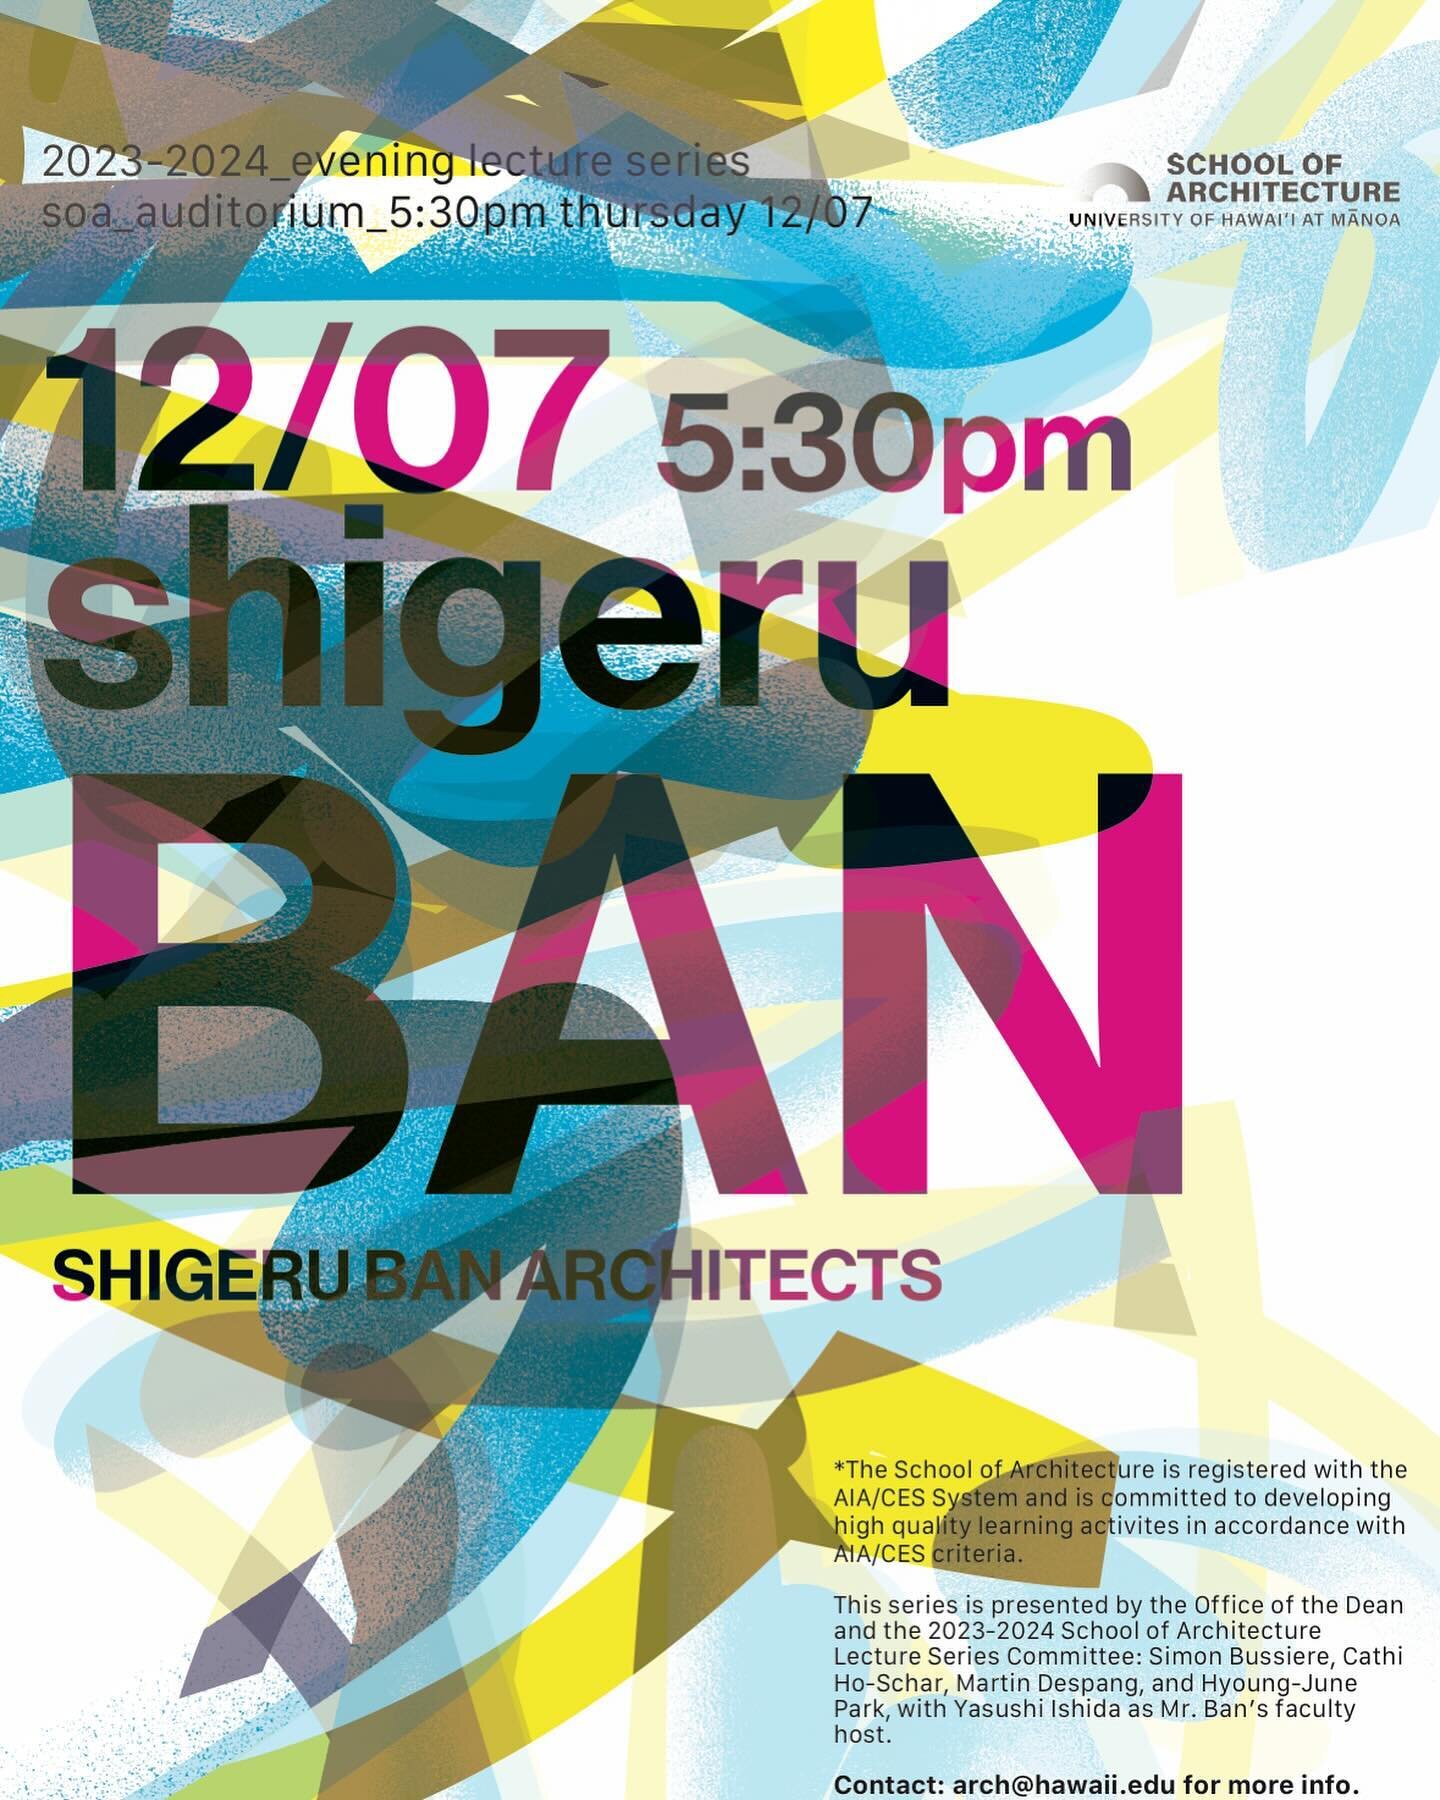 @archawaii presents a last minute entry to their lecture series with 2014 Pritzker Prize Laureate, Shigeru Ban. 

Shigeru Ban is globally recognized for his innovative use of paper tubes in disaster relief construction. This lecture will provide an o